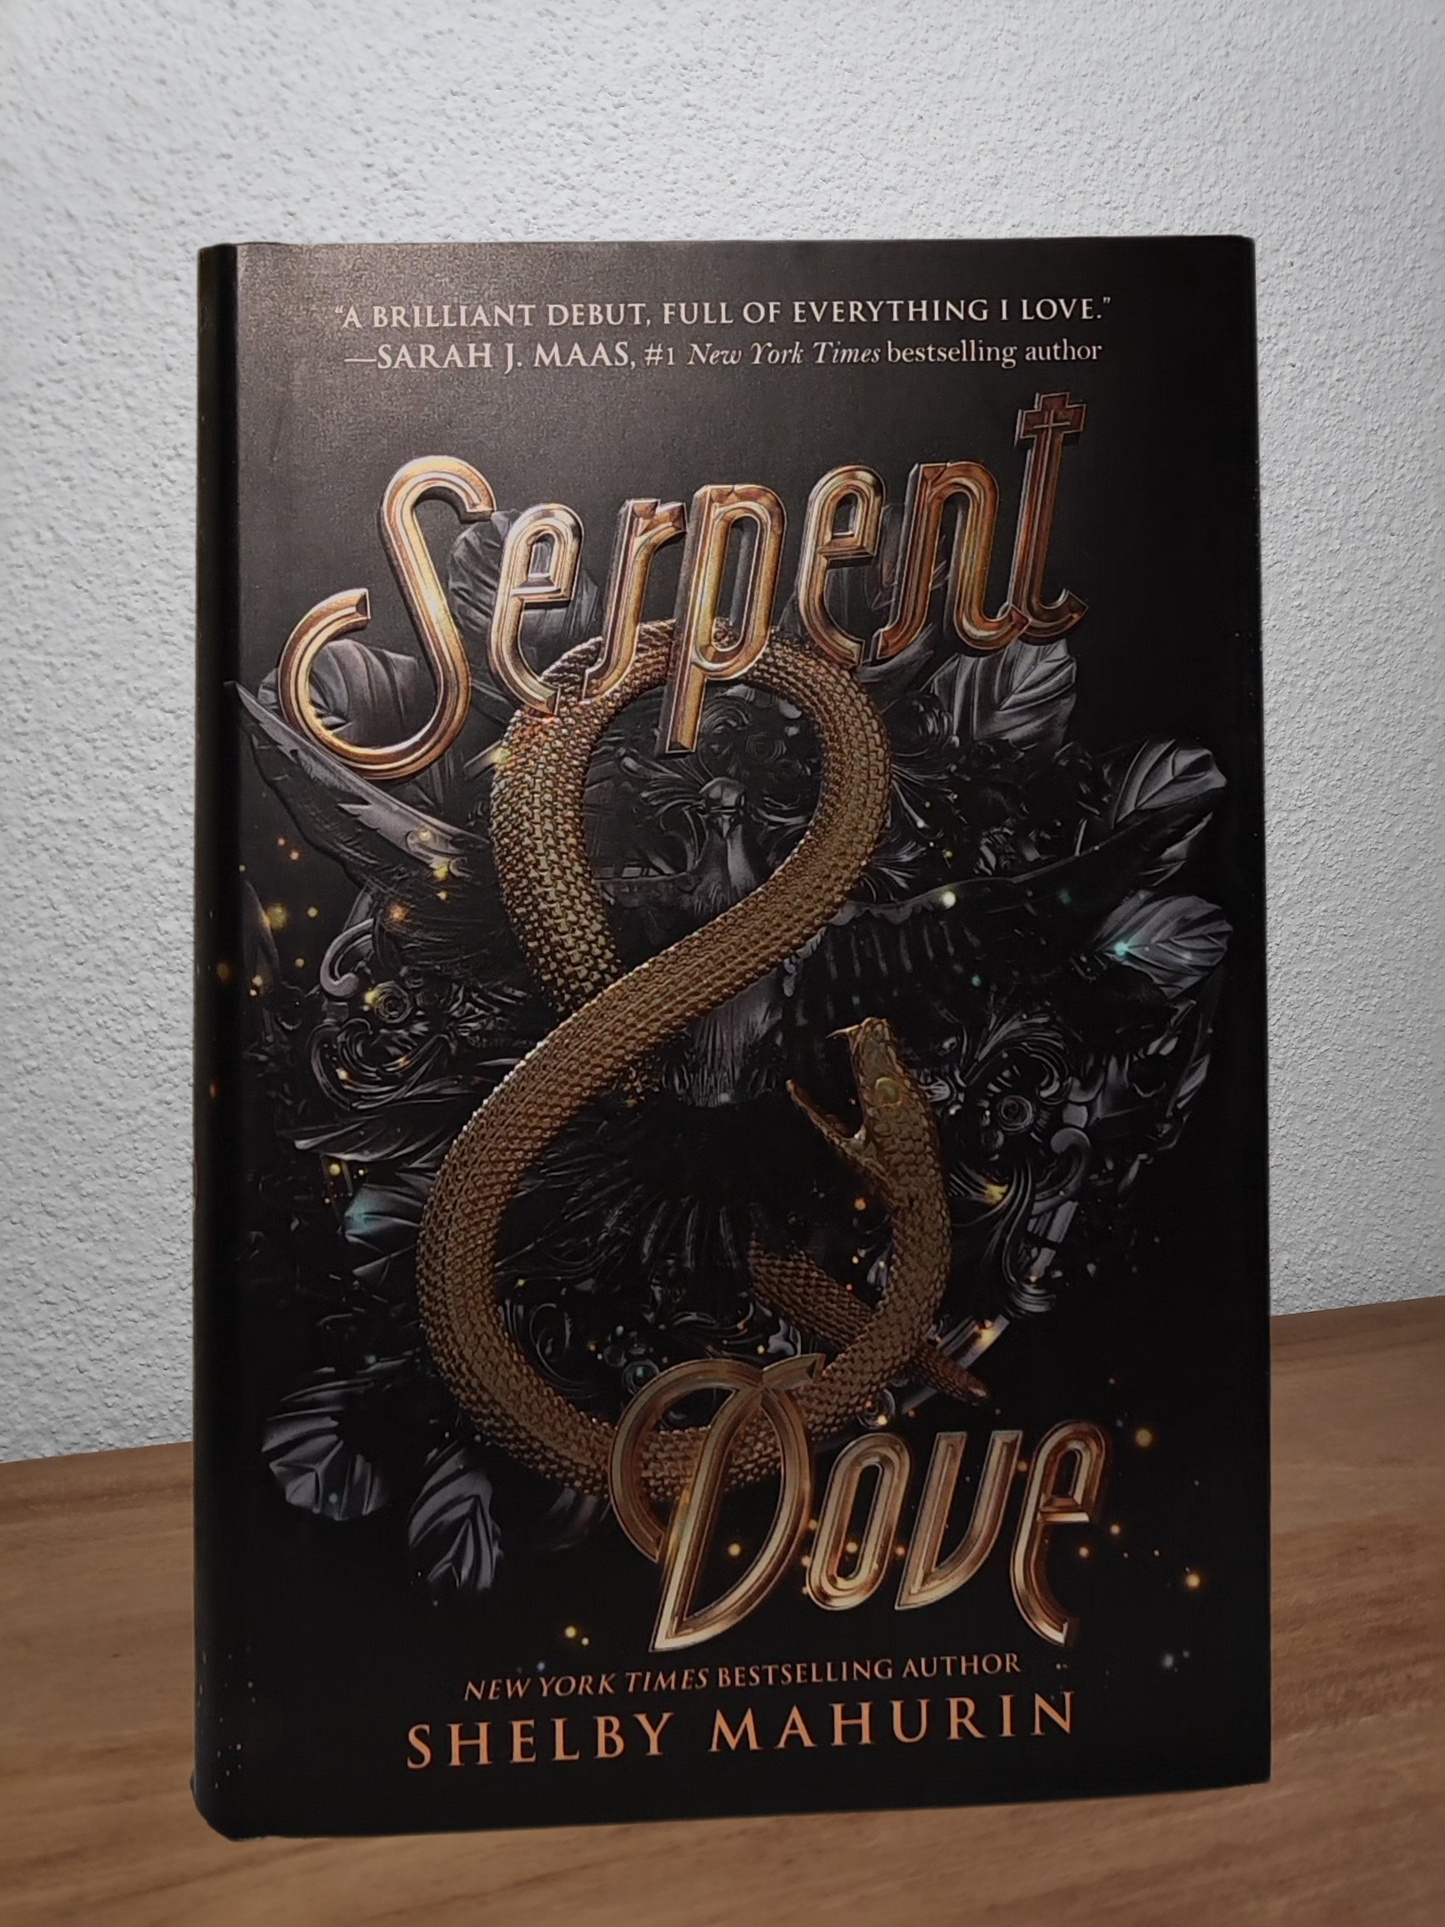 Shelby Mahurin - Serpent Dove - Second-hand english book to deliver in Zurich & Switzerland